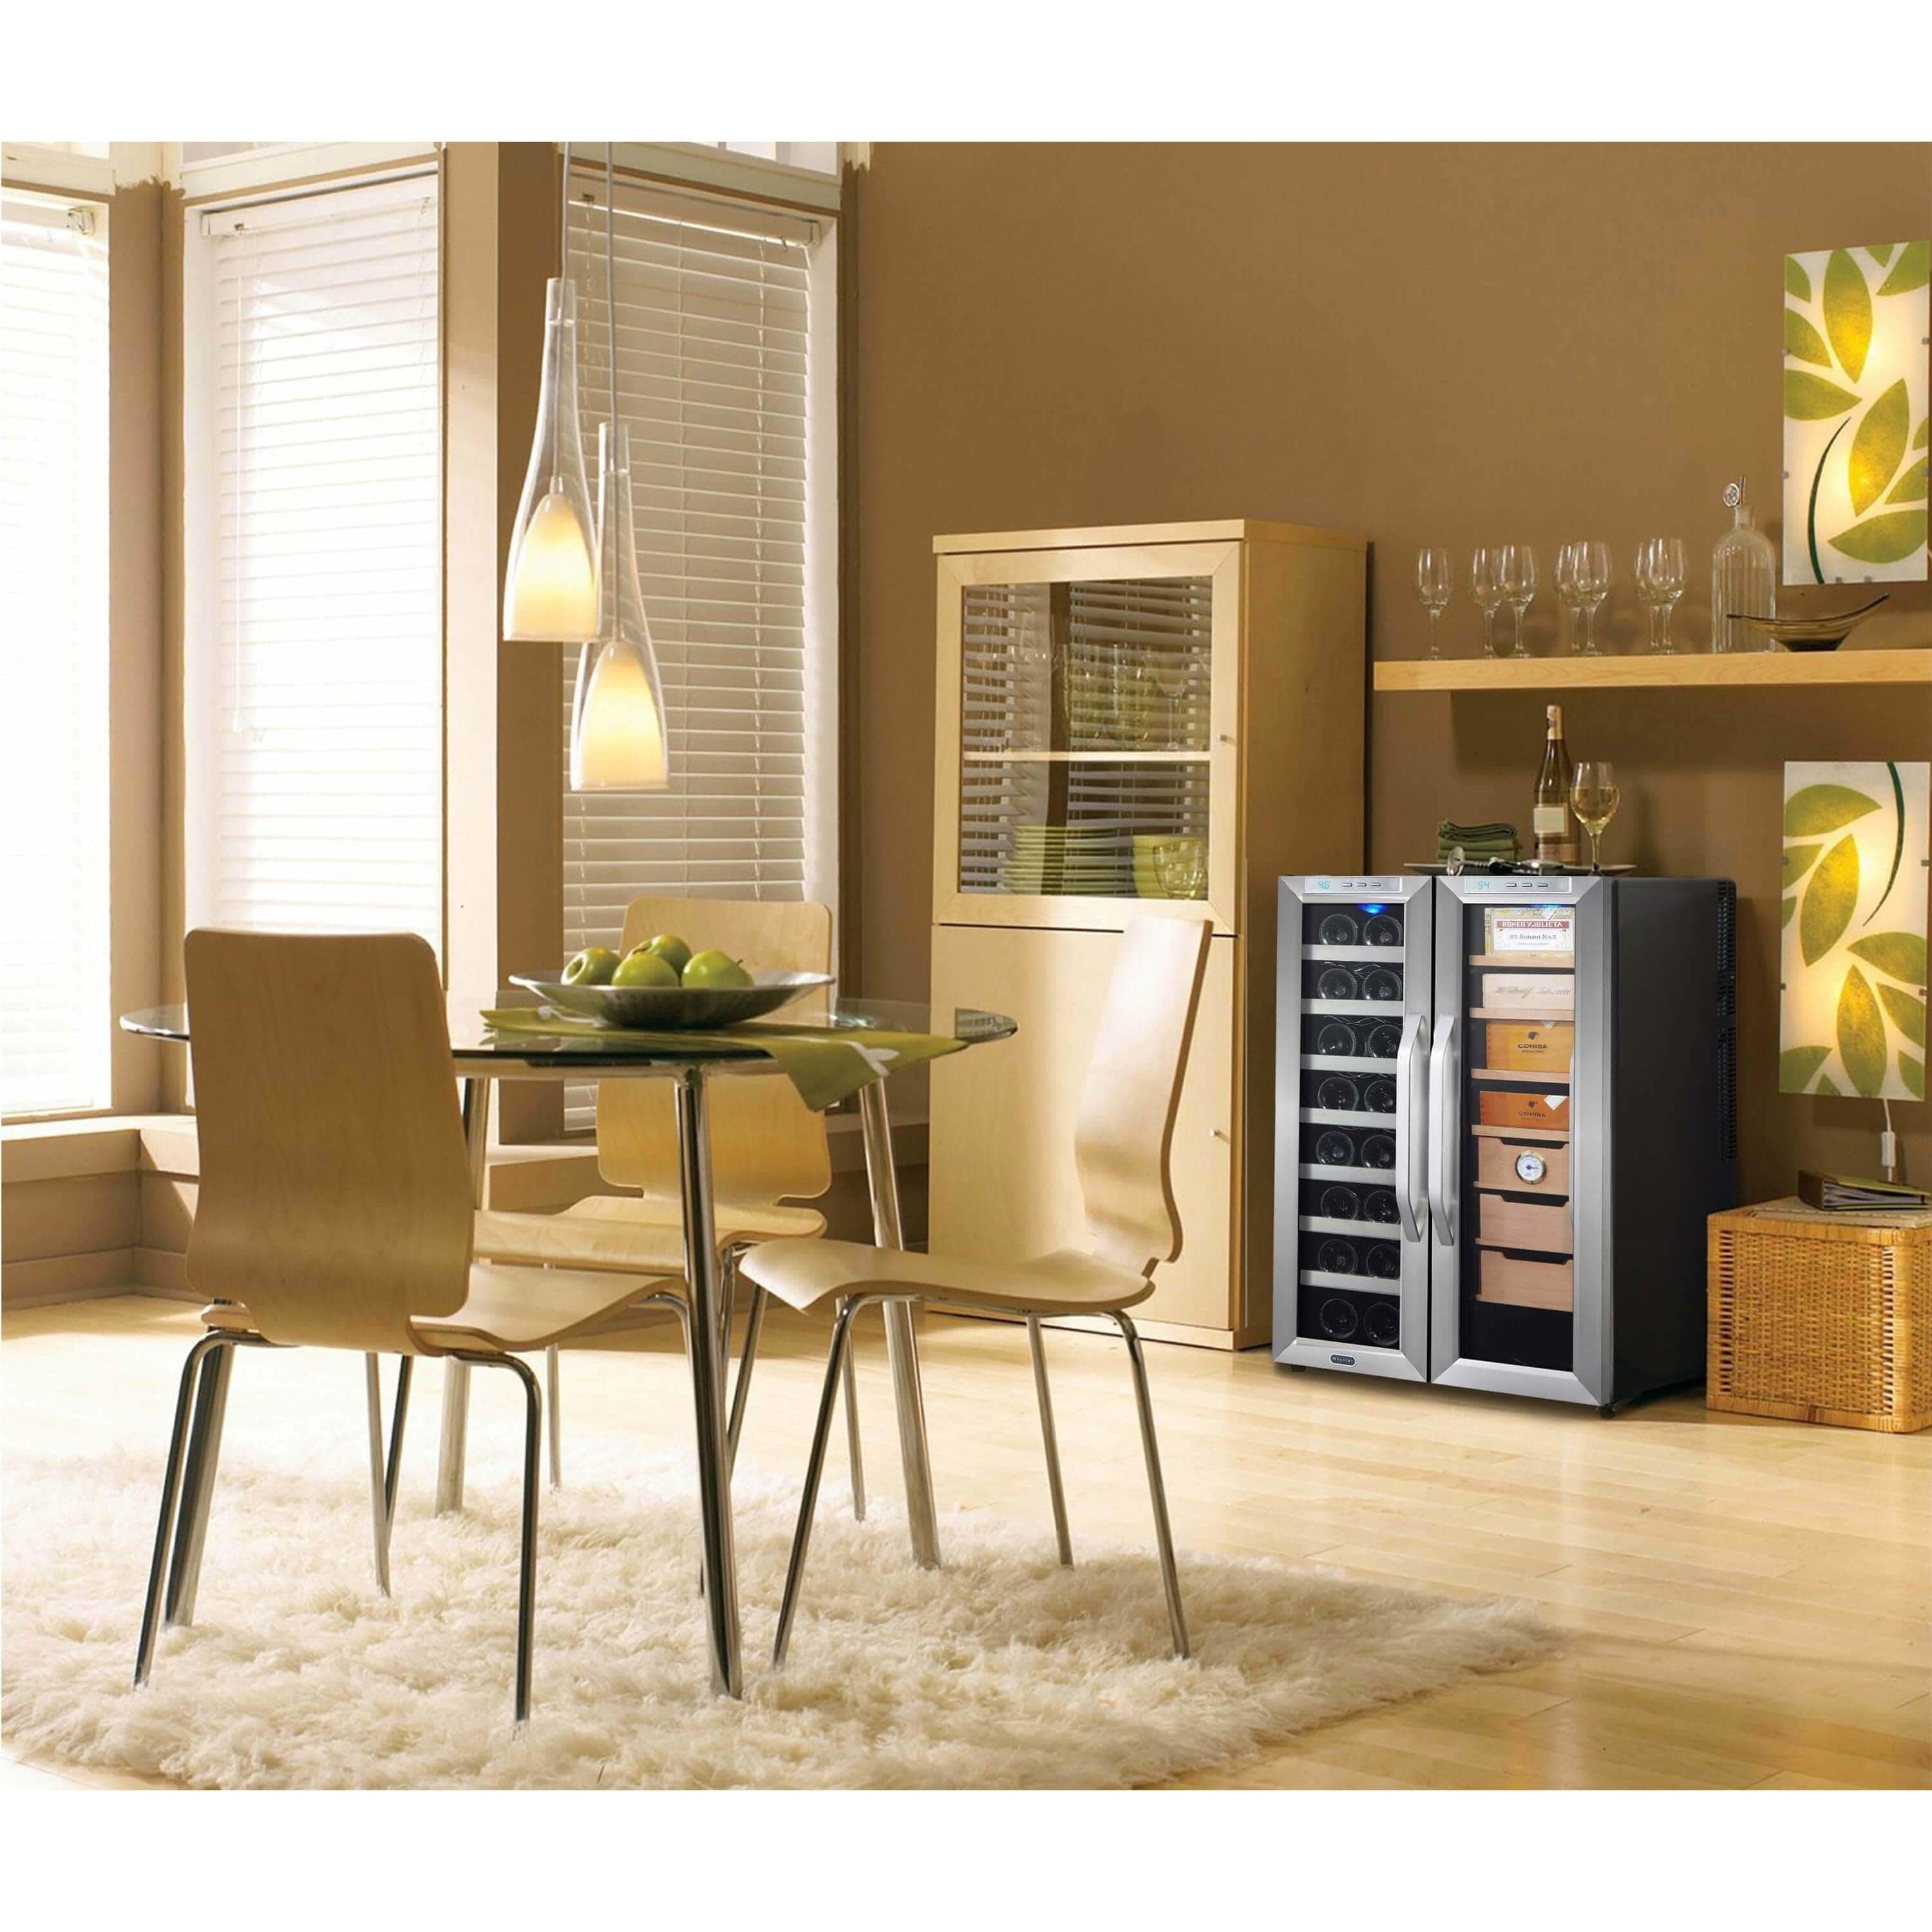 Whynter Freestanding 3.6 cu. ft. Wine Cooler and Cigar Humidor Center CWC-351DD Discontinued Wine Coolers Empire